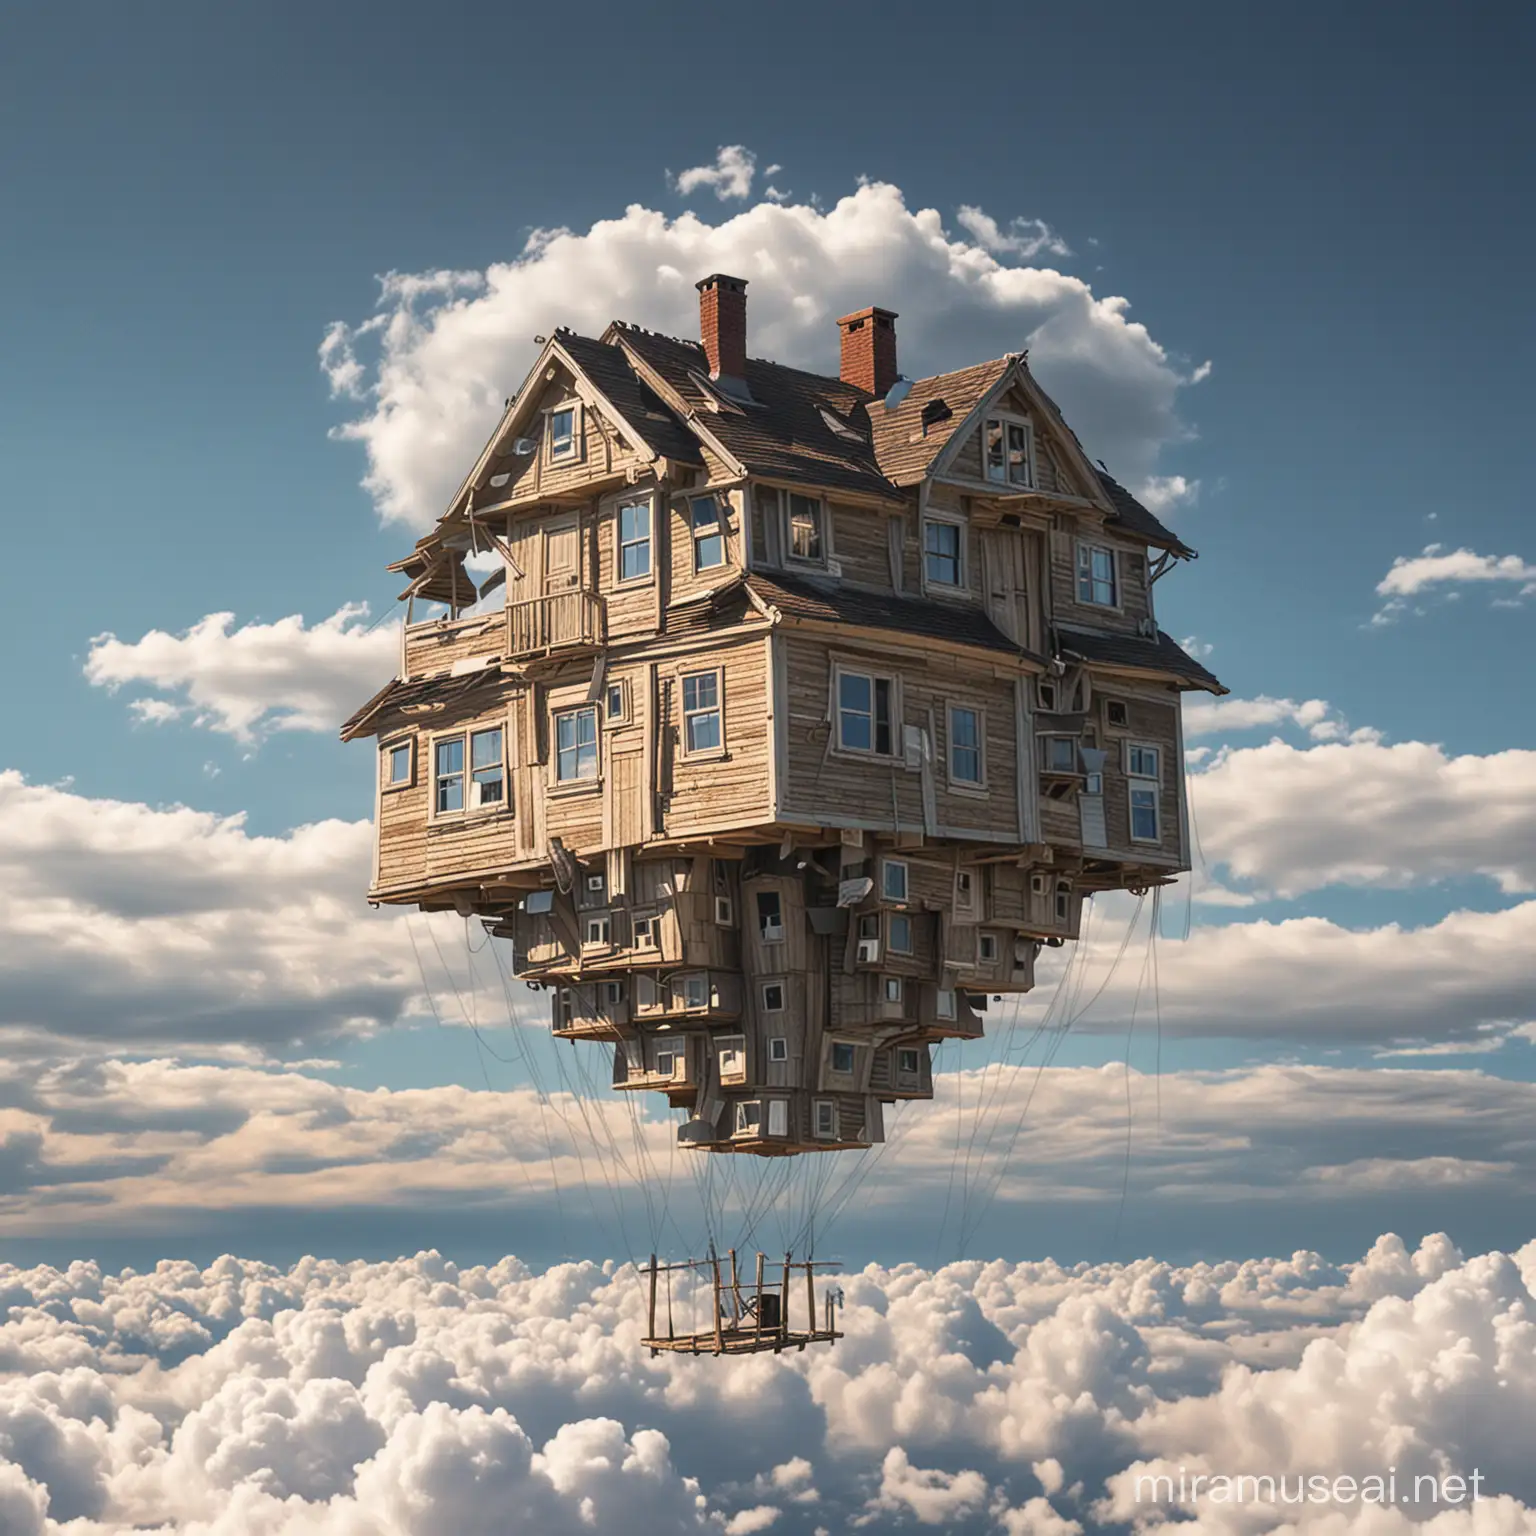 Fantasy Floating House Illustration Dreamy Residence Suspended in the Air